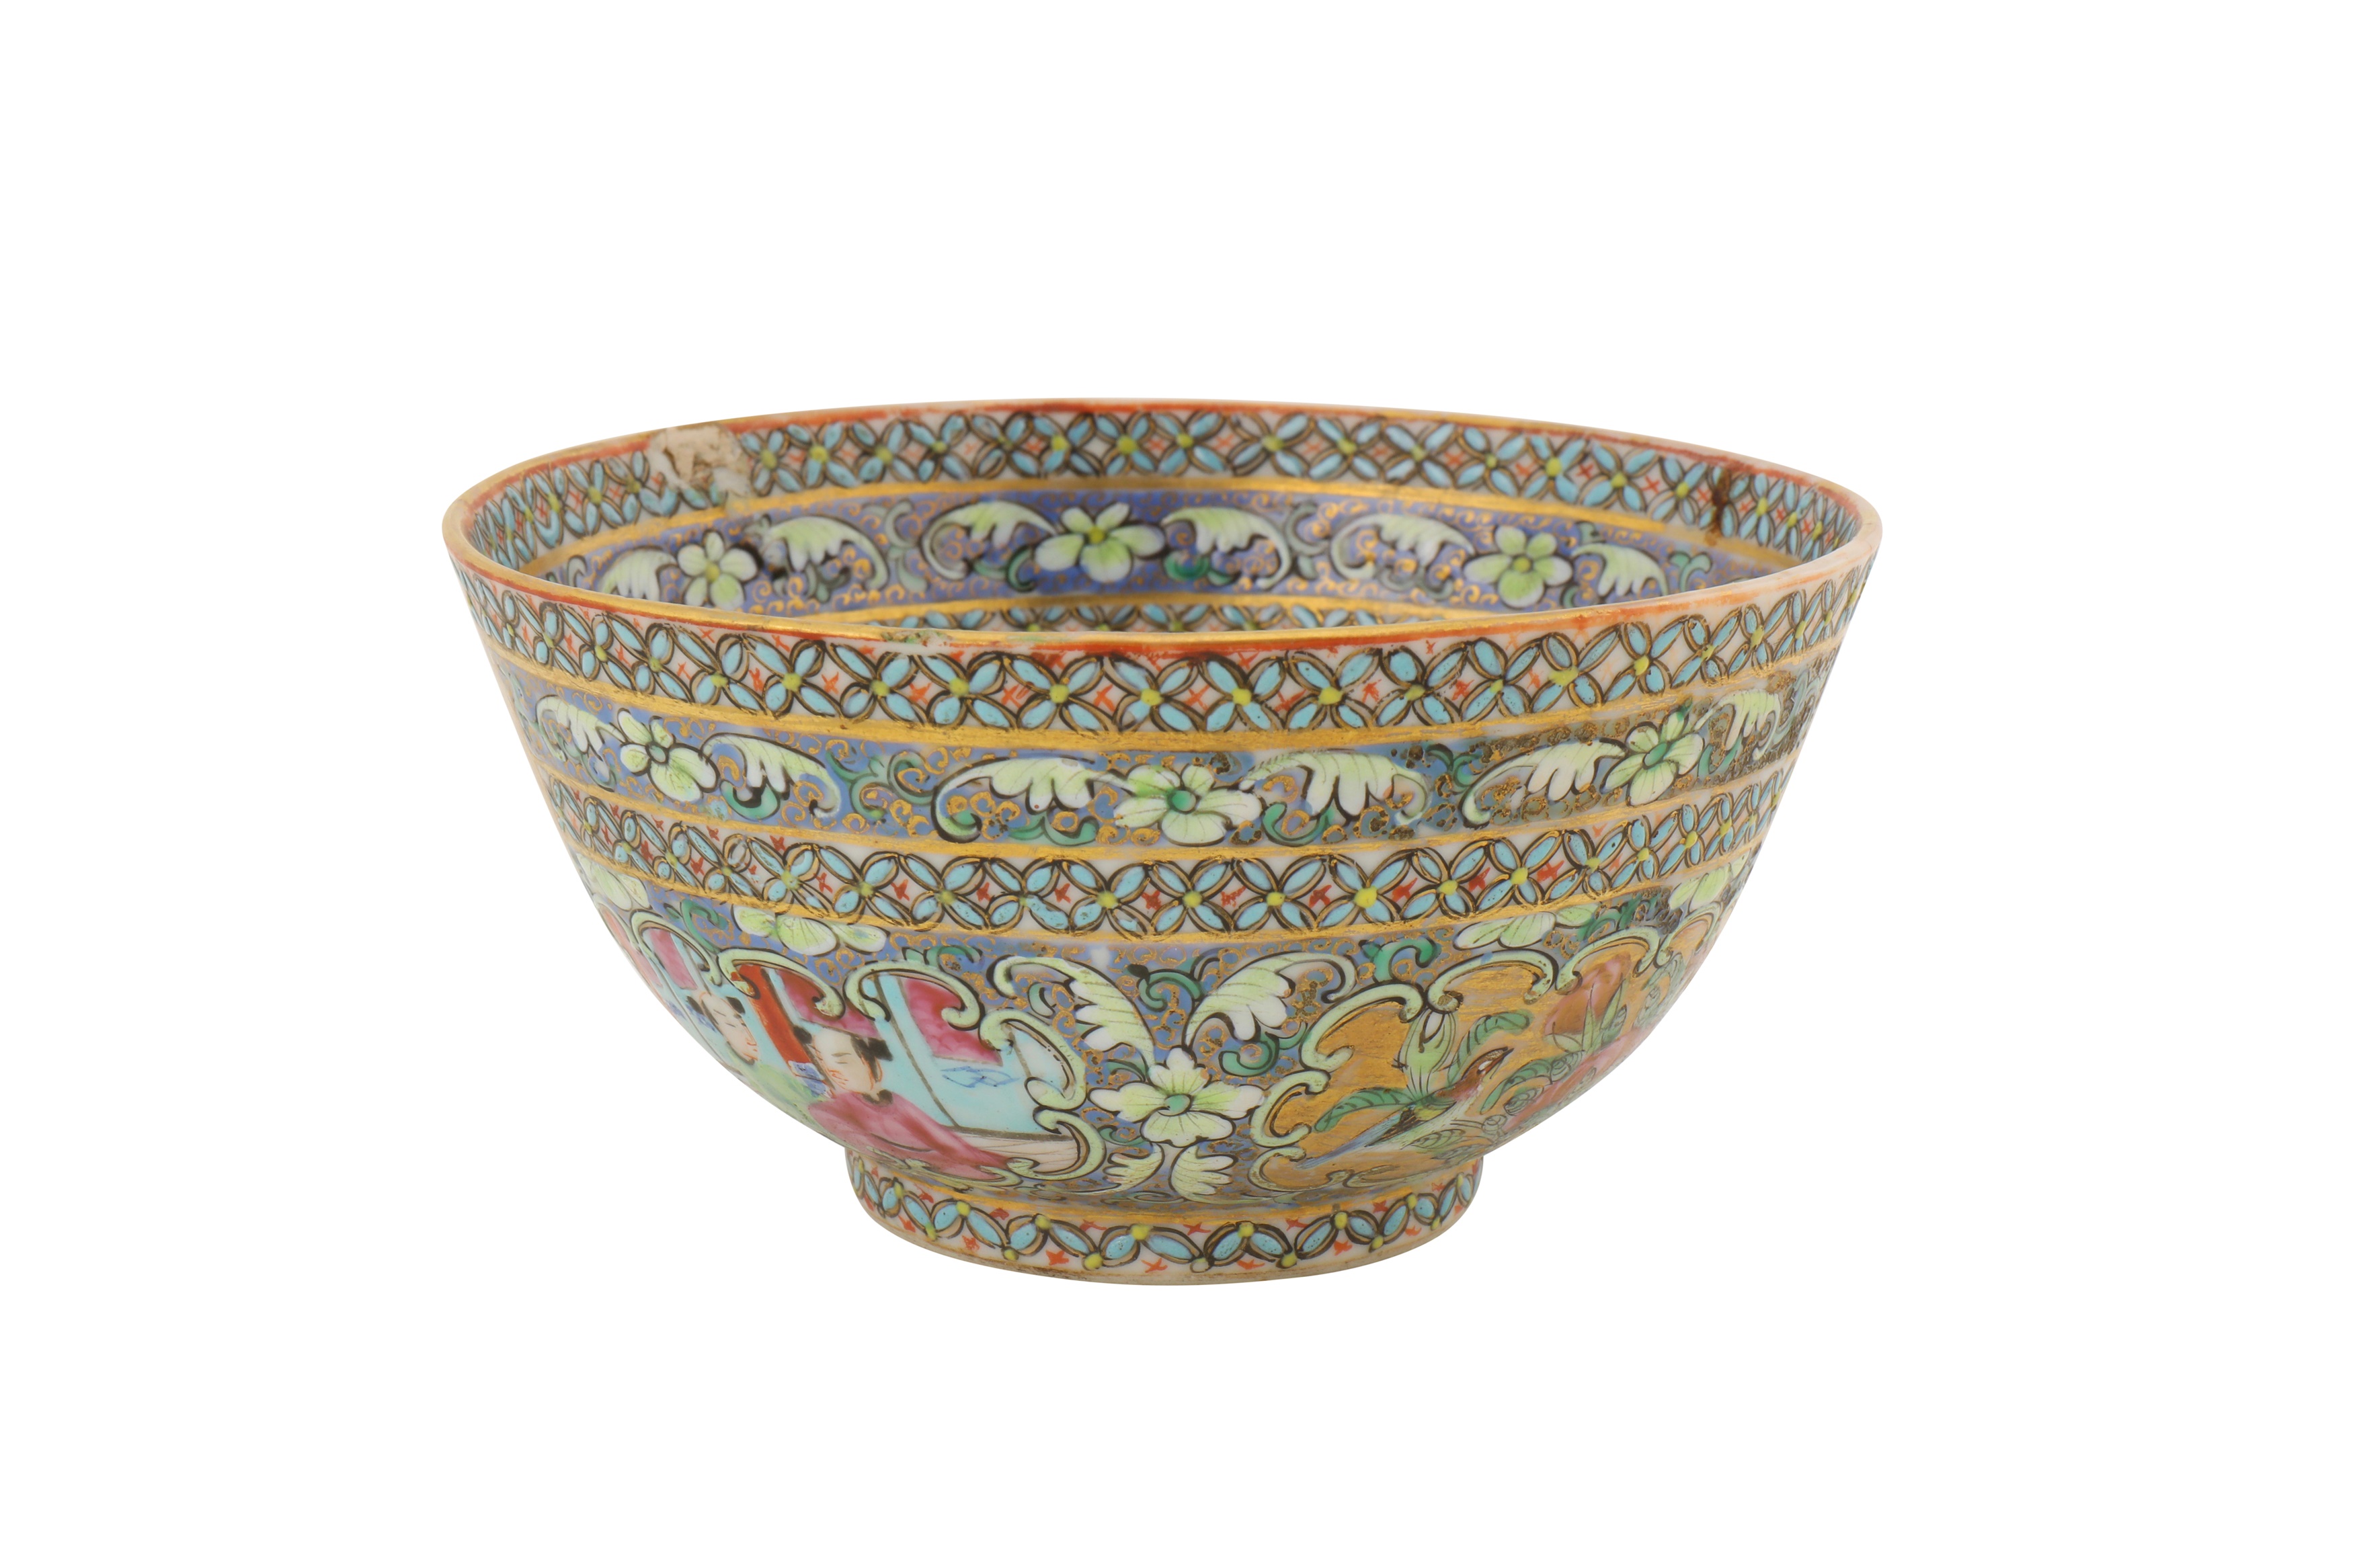 A MEDIUM-SIZED BOWL AND DISH AND SMALLER BOWL FROM THE ZILL AL-SULTAN CANTON PORCELAIN SERVICE - Image 6 of 17